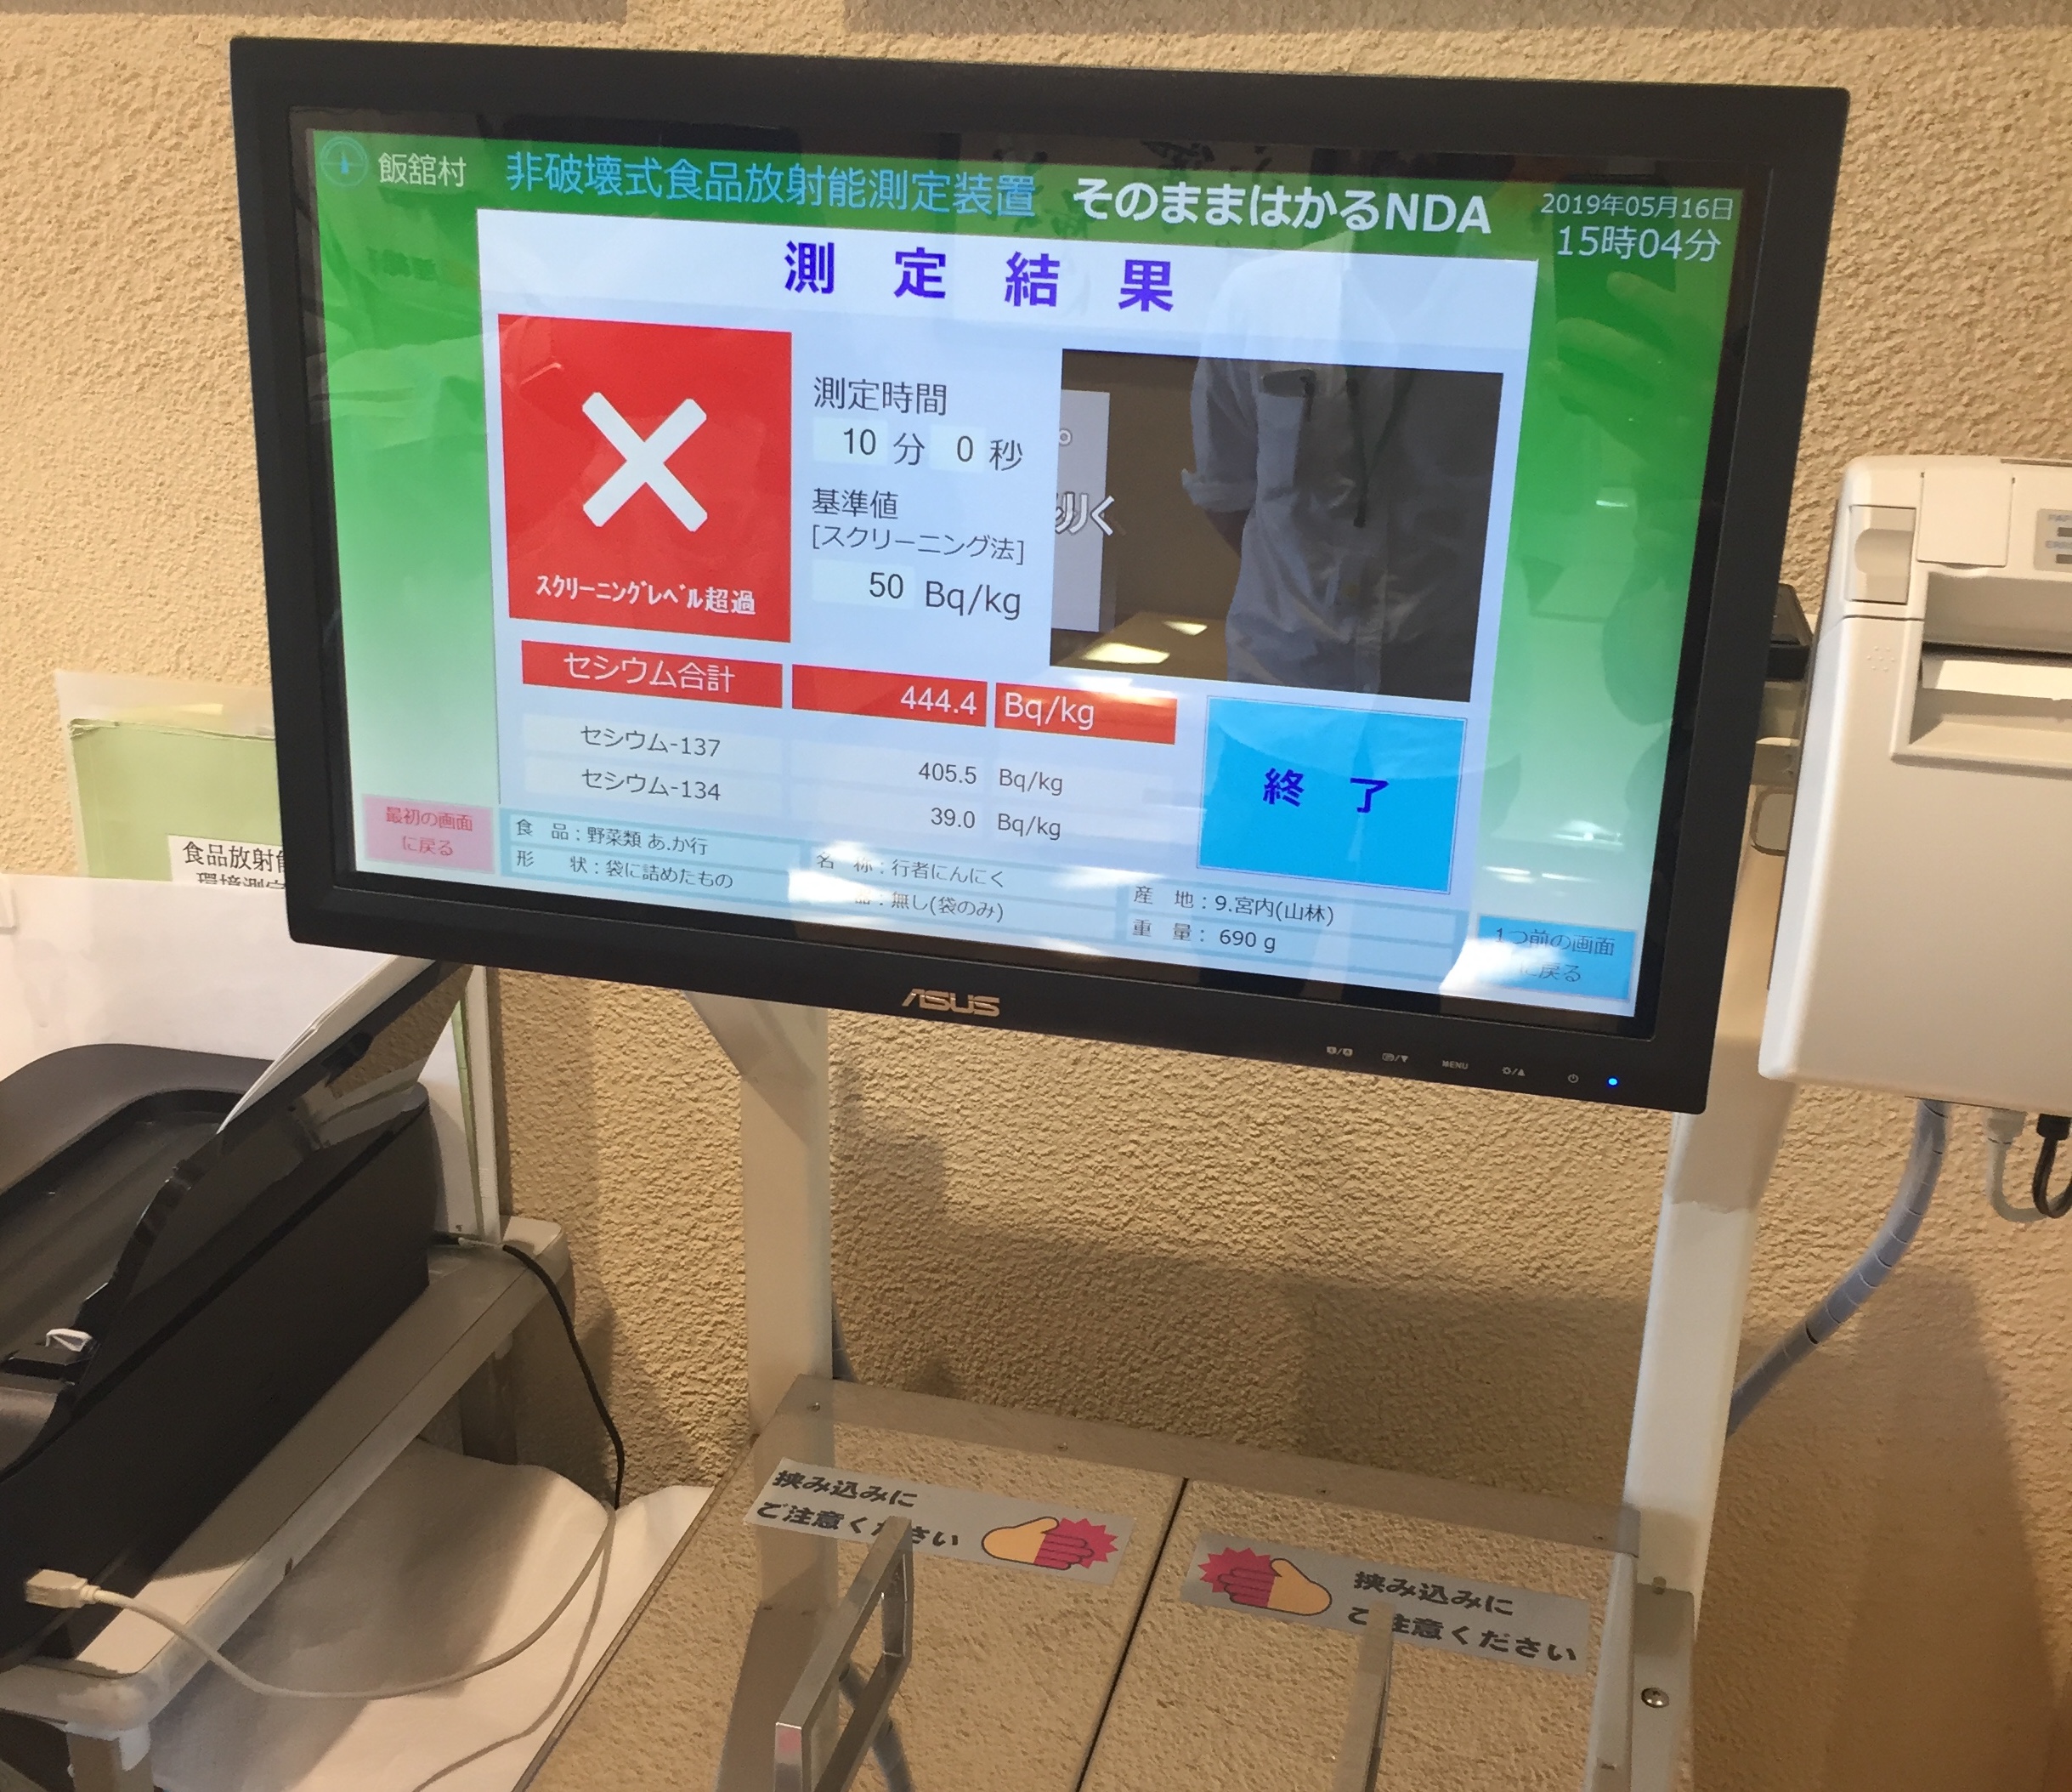 Food monitoring device showing an X on a red background